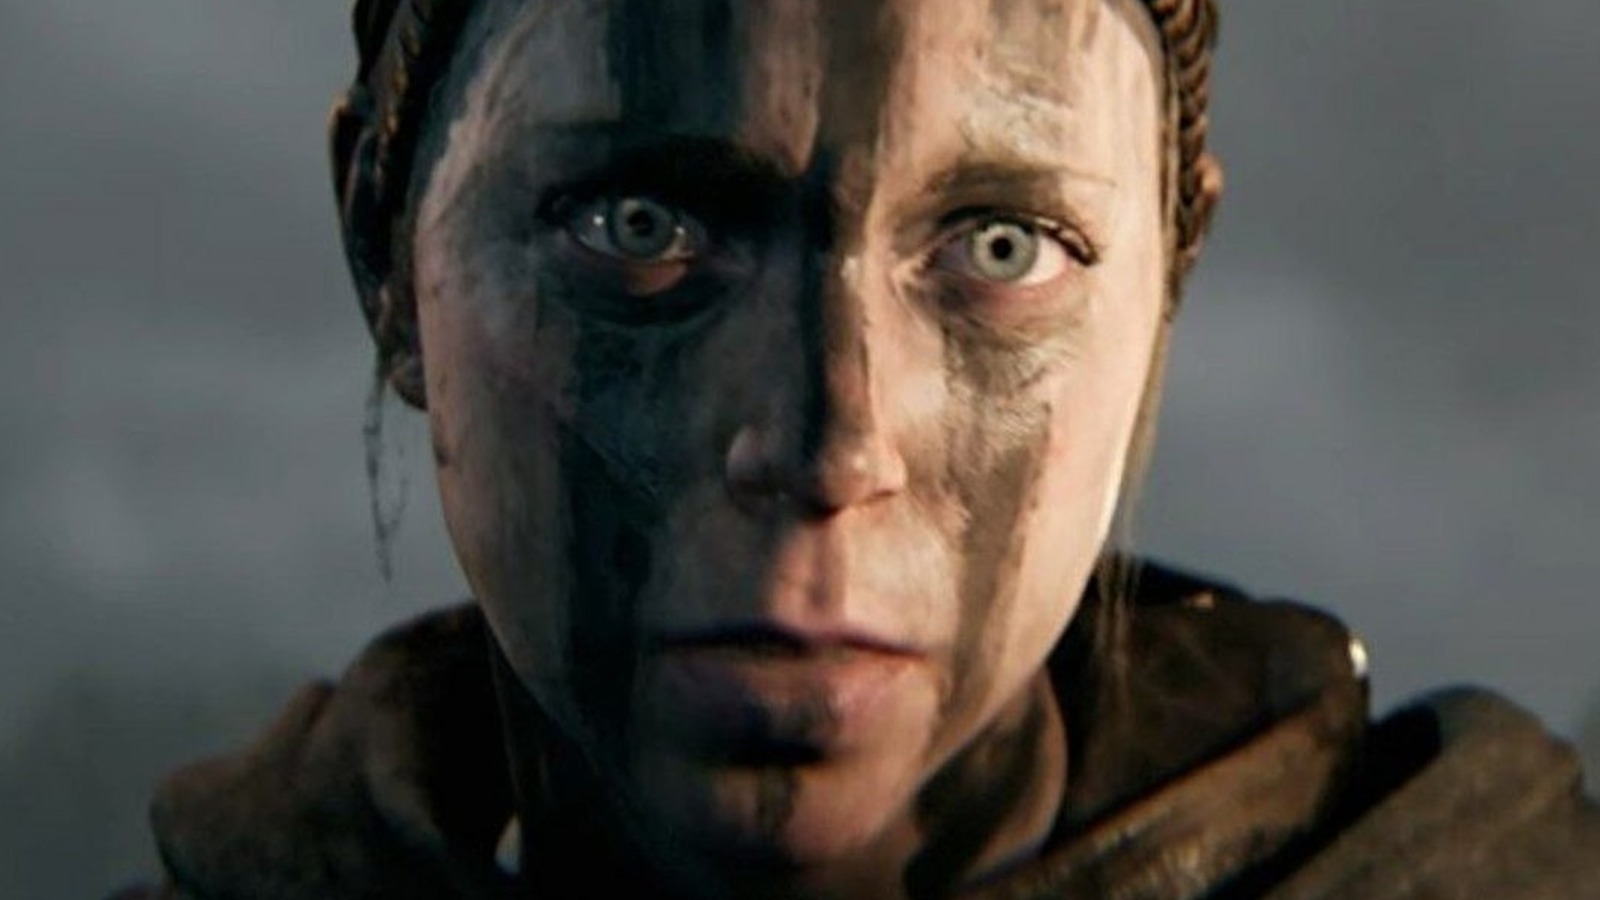 Hellblade 2 confirmed for both PC and Xbox Series X